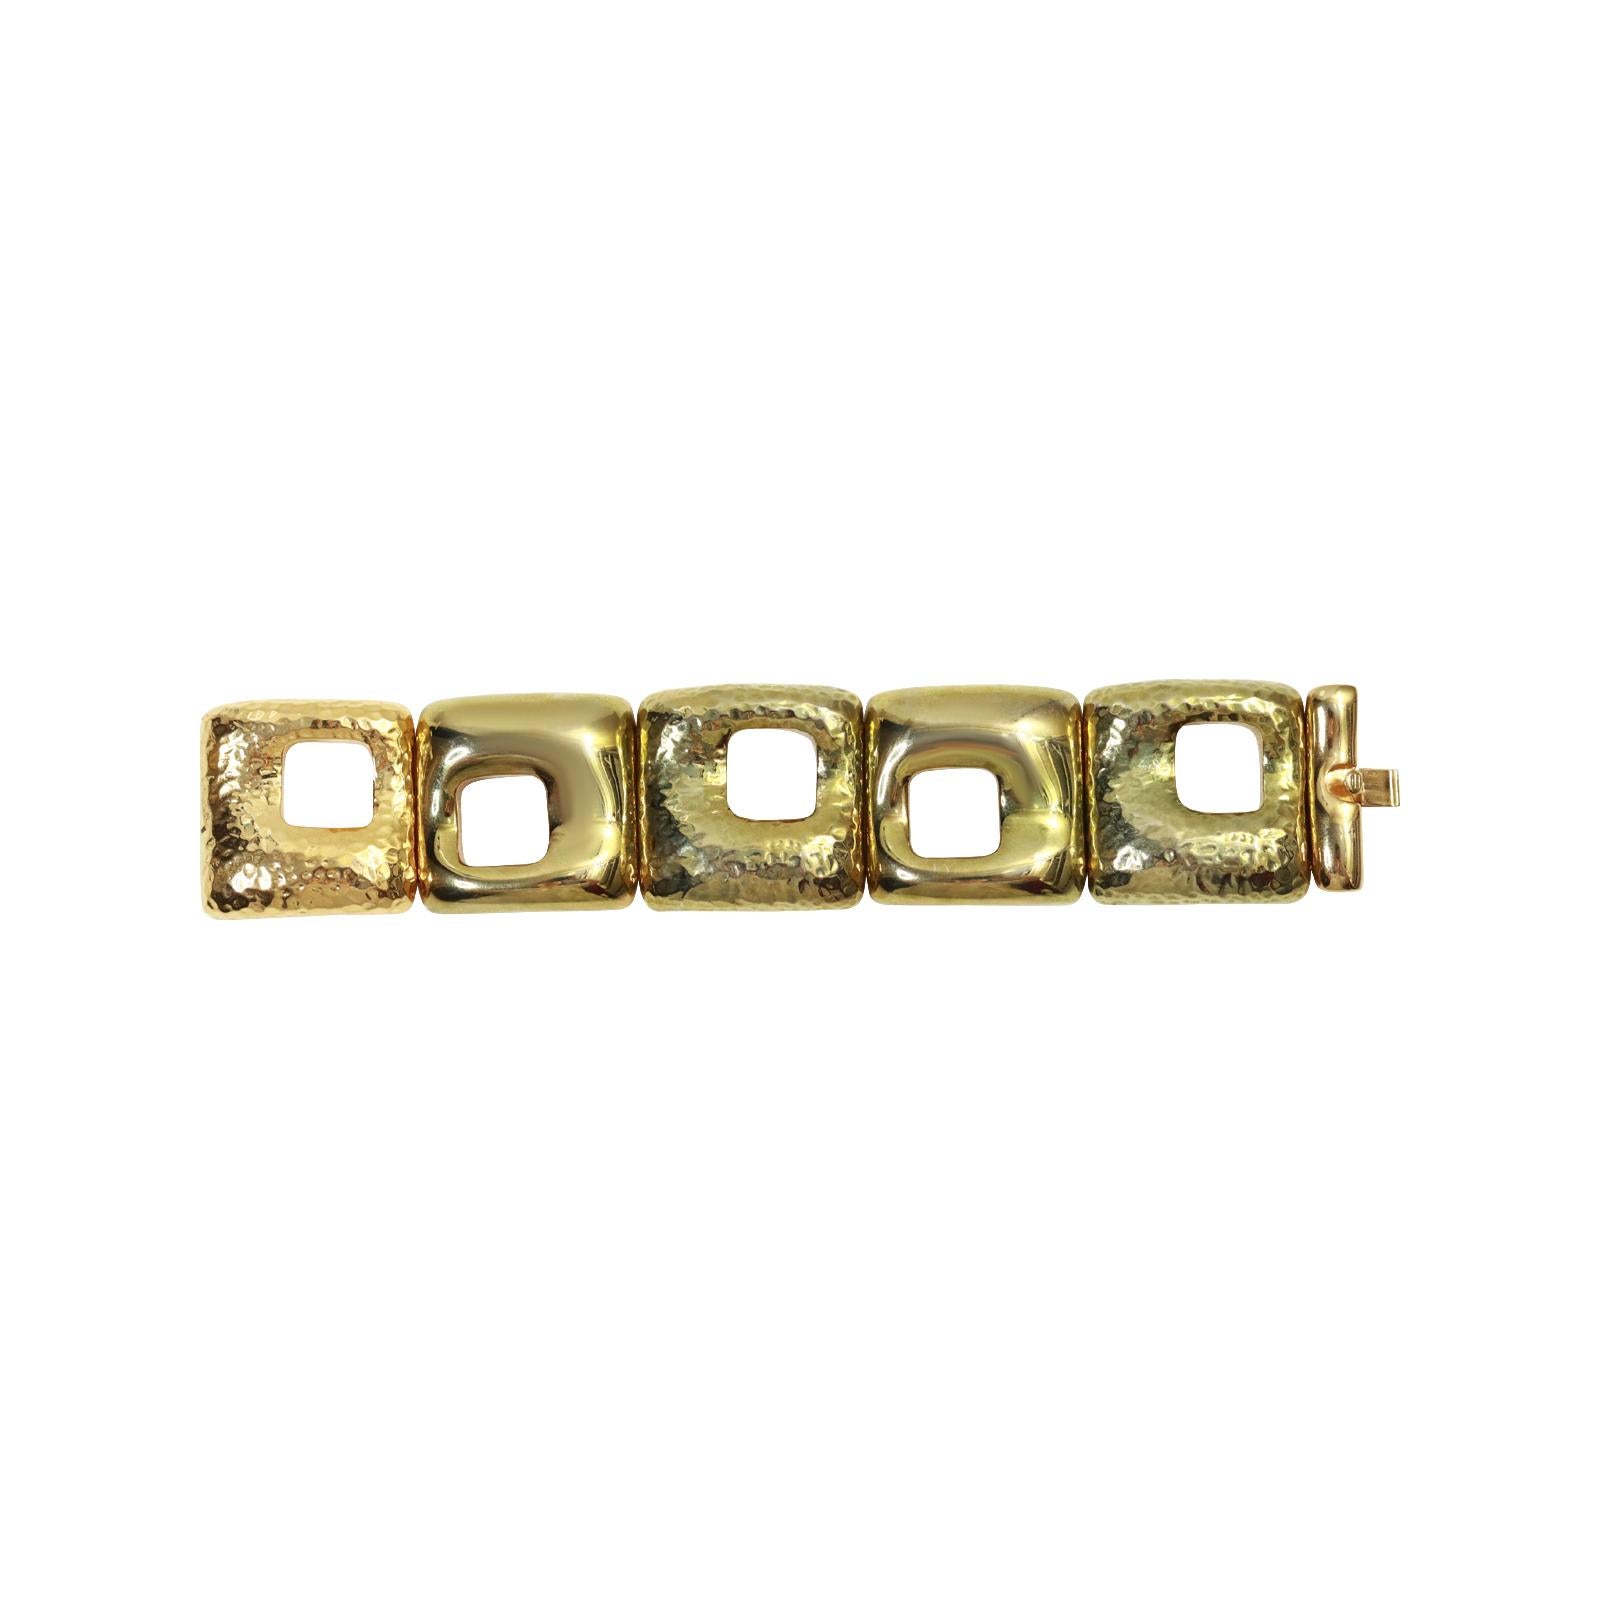 Vintage Gold Tone Heavy Link Bracelet Circa 1980s. This bracelet has large and very substantial squares.  Two are shiny gold and three are hammered gold tone.  They close tightly with a slide in clasp but what makes it unusual is that they are stung